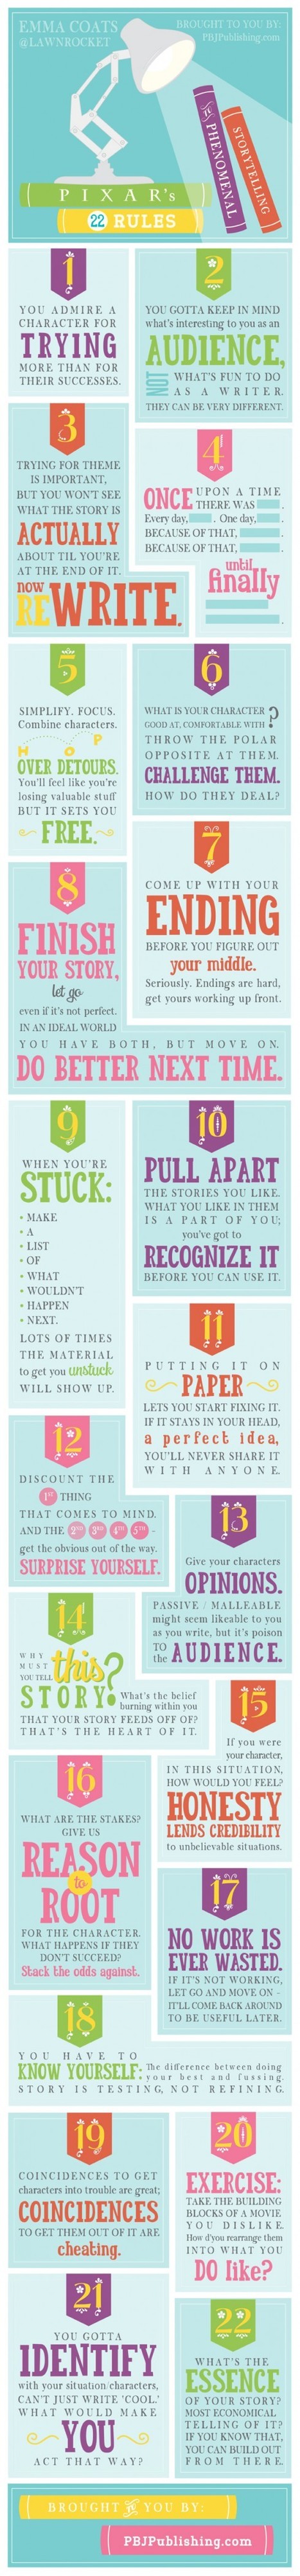 Pixar’s 22 Rules to Phenomenal Storytelling [INFOGRAPHIC] | Daily Magazine | Scoop.it